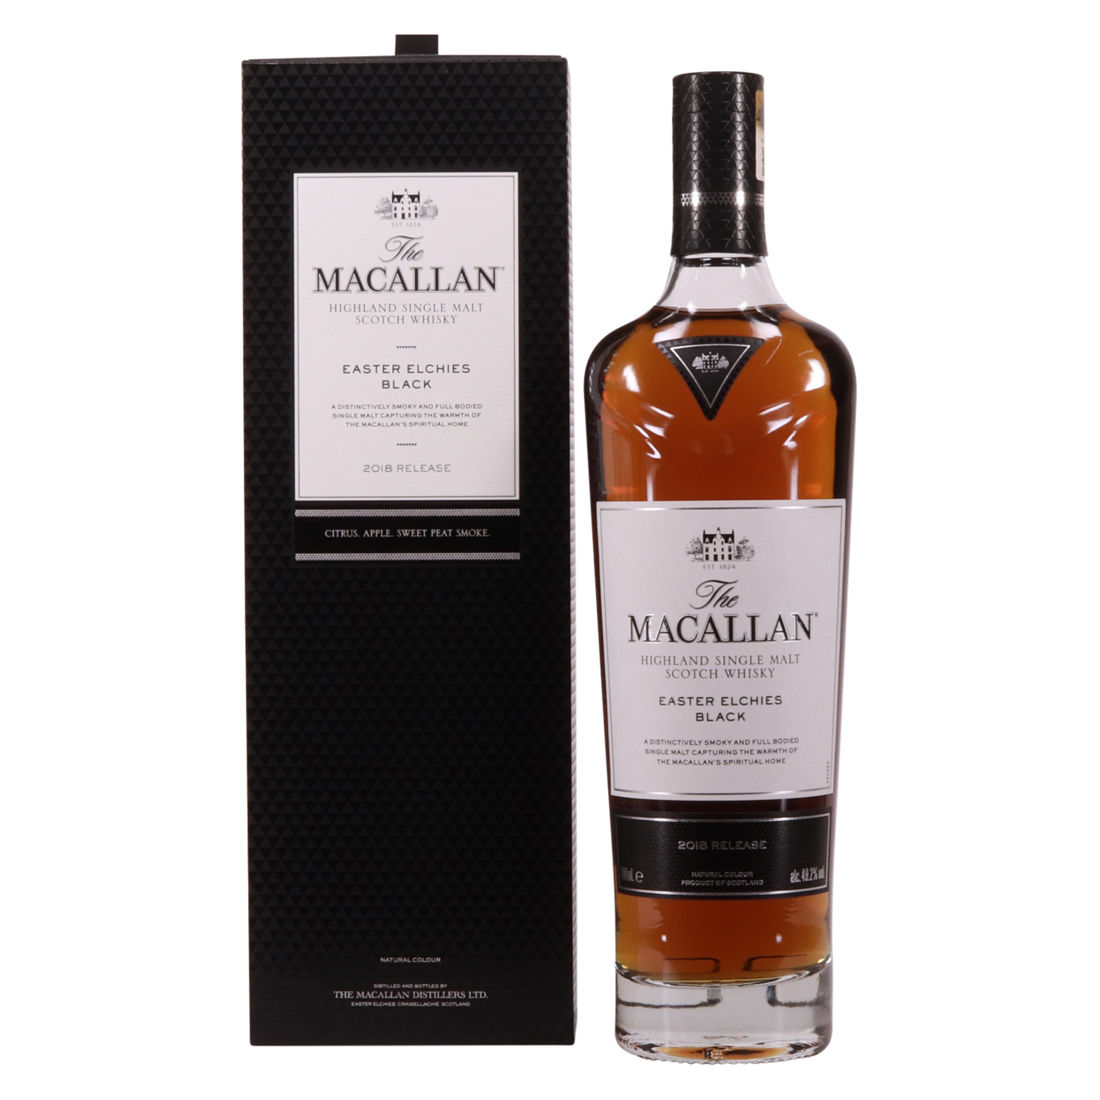 Macallan Easter Elchies Black Auction The Grand Whisky Auction